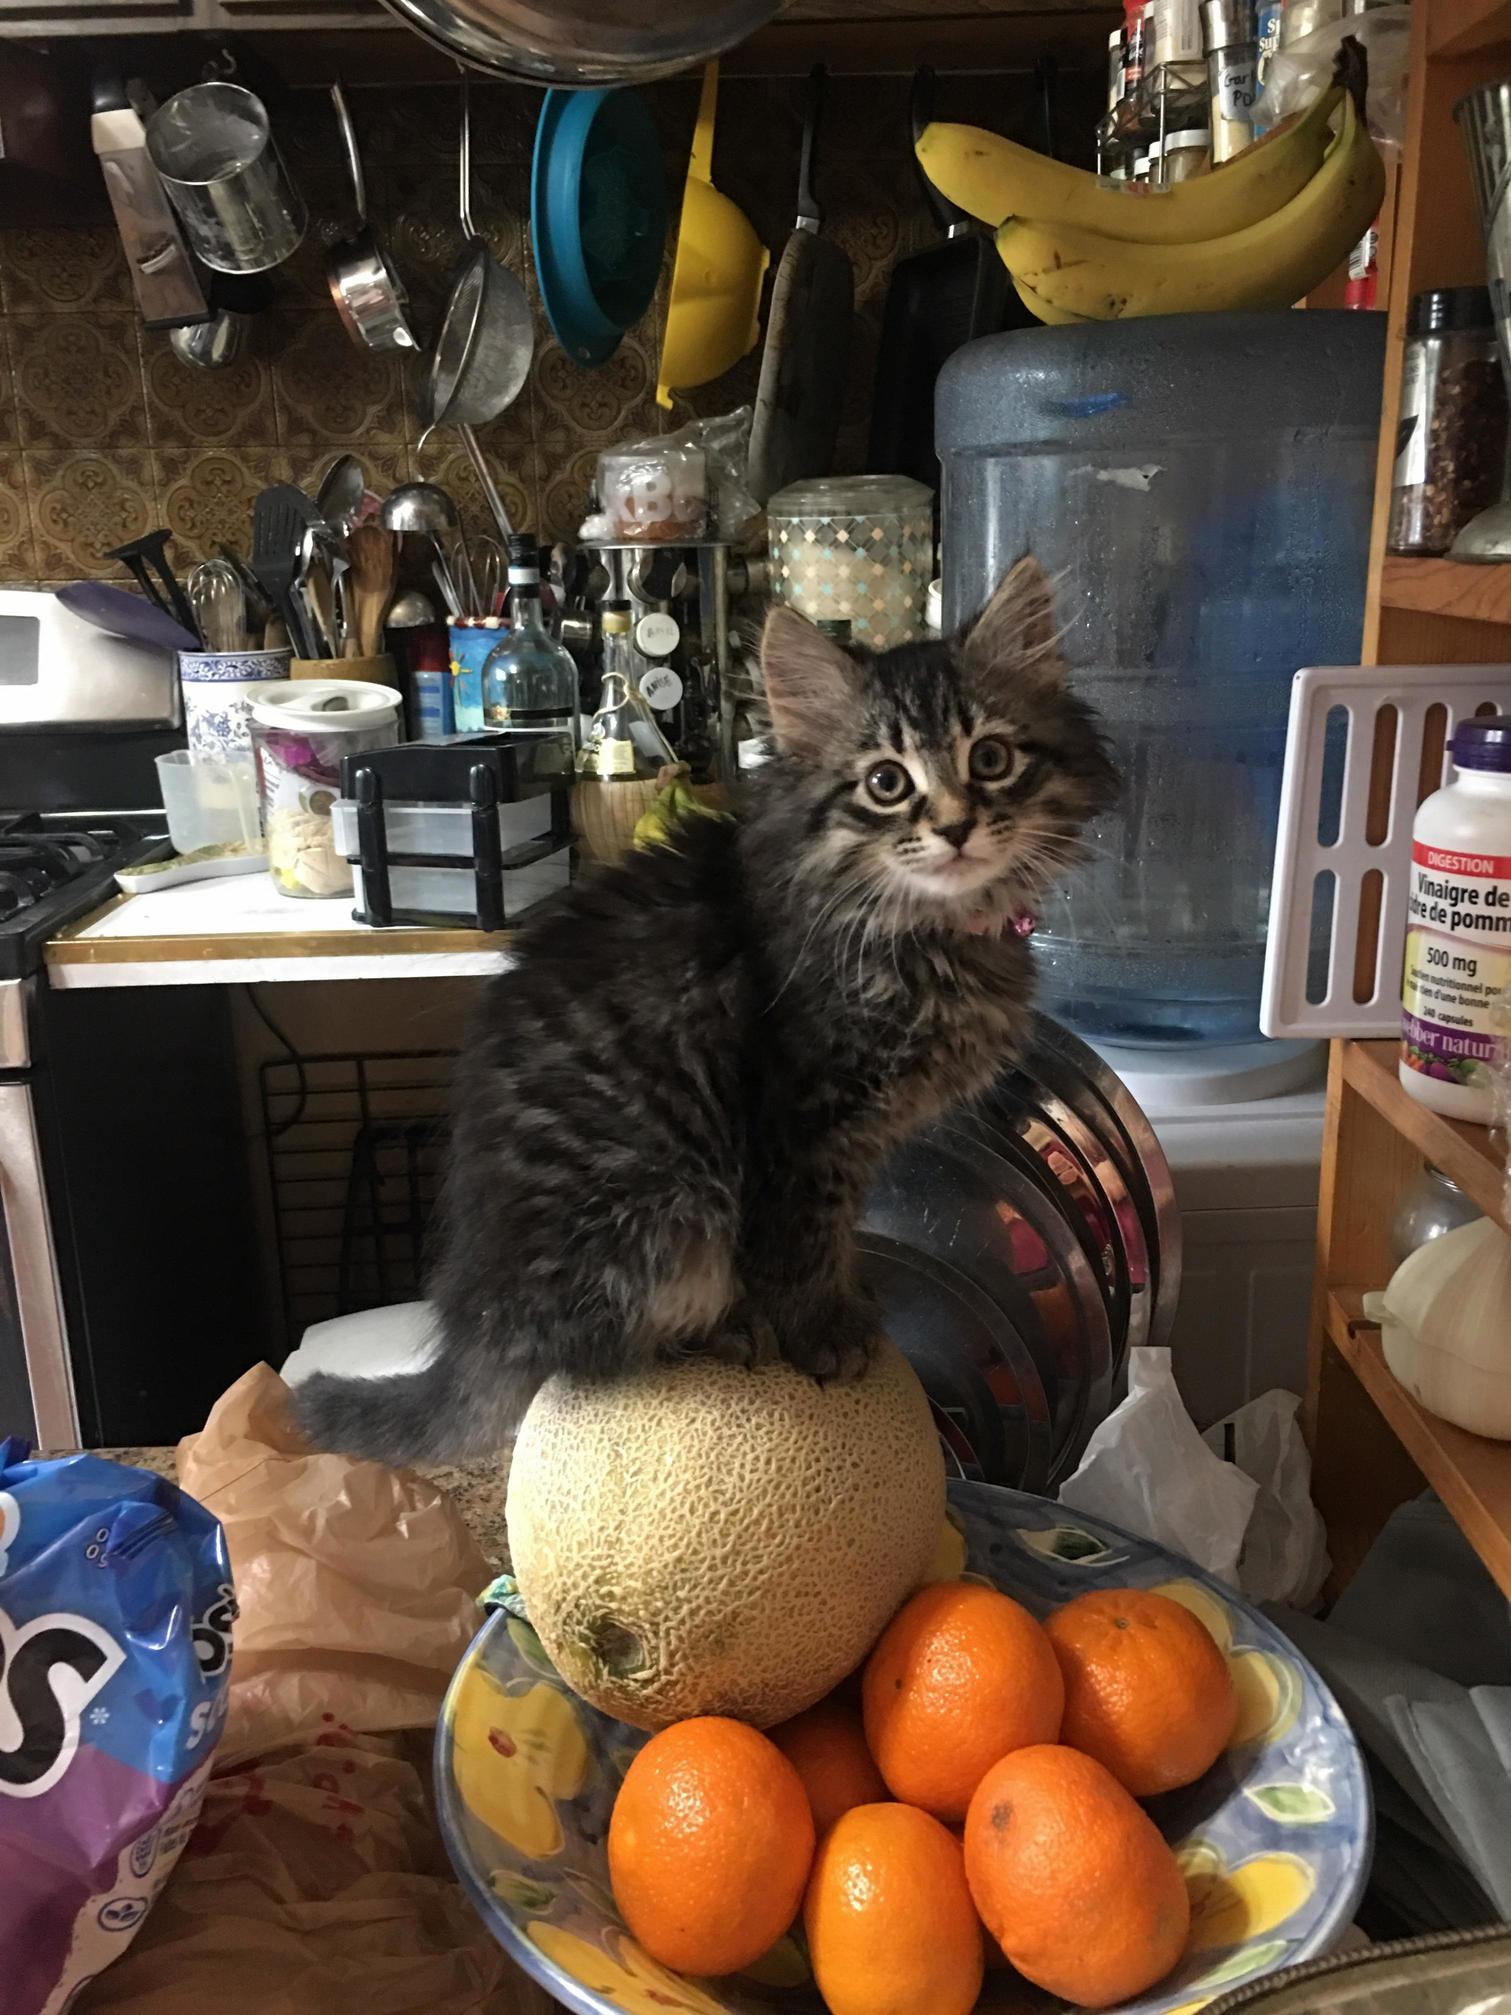 A few days after adopting our kitten, we couldnt find the her anywhere. i guess its because we arent use to looking in the fruit bowls. welcome to the family, charlie!